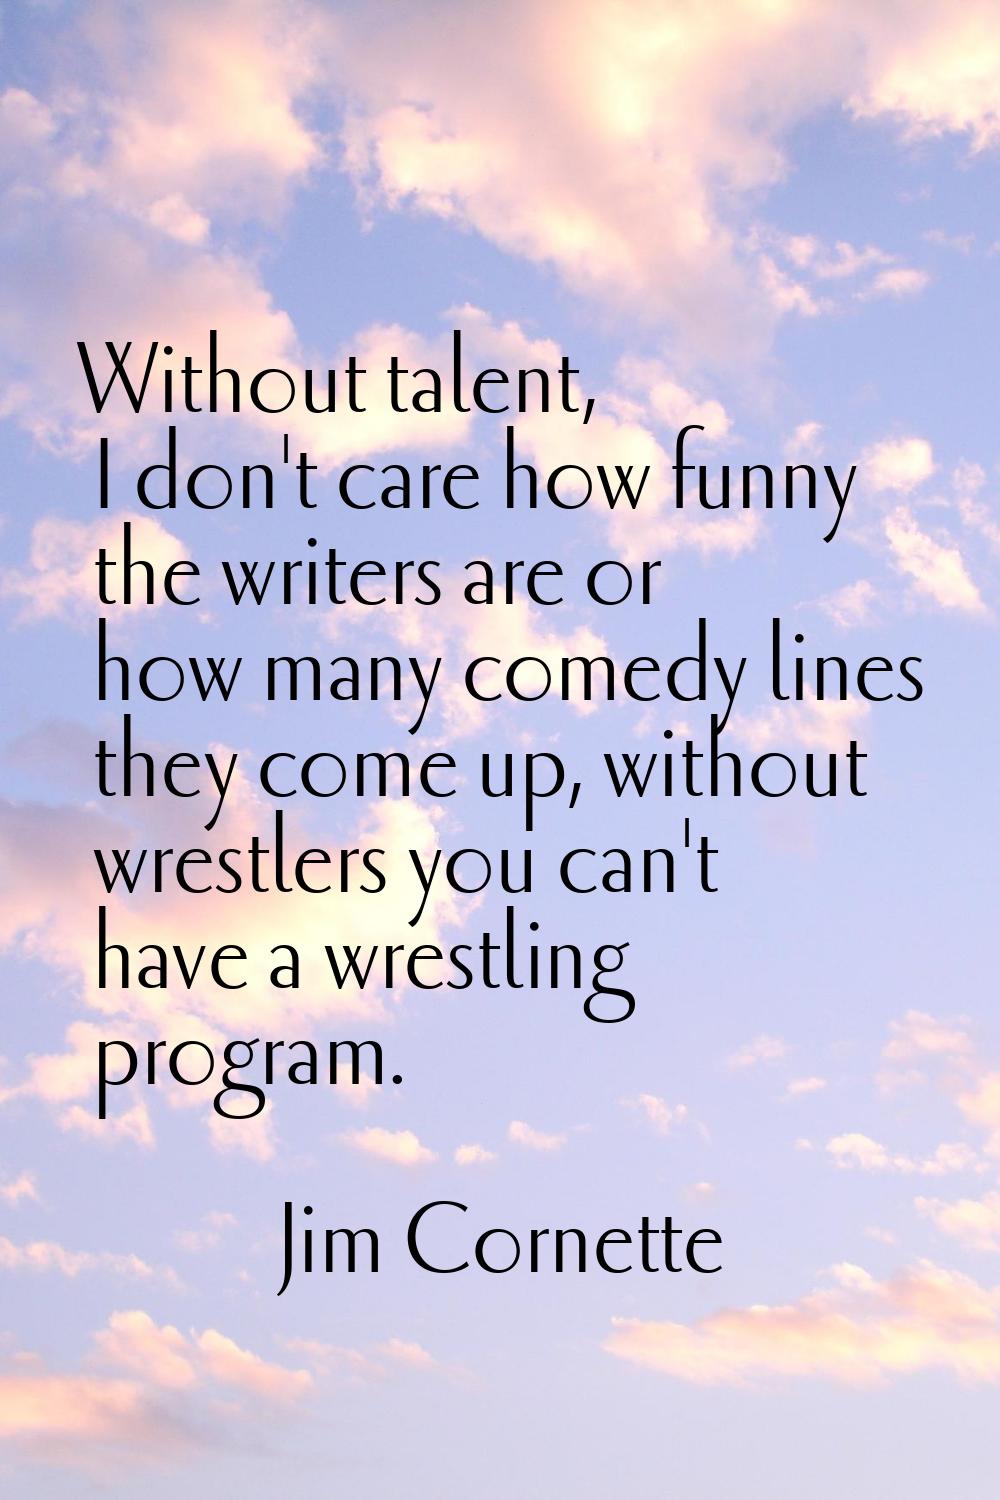 Without talent, I don't care how funny the writers are or how many comedy lines they come up, witho